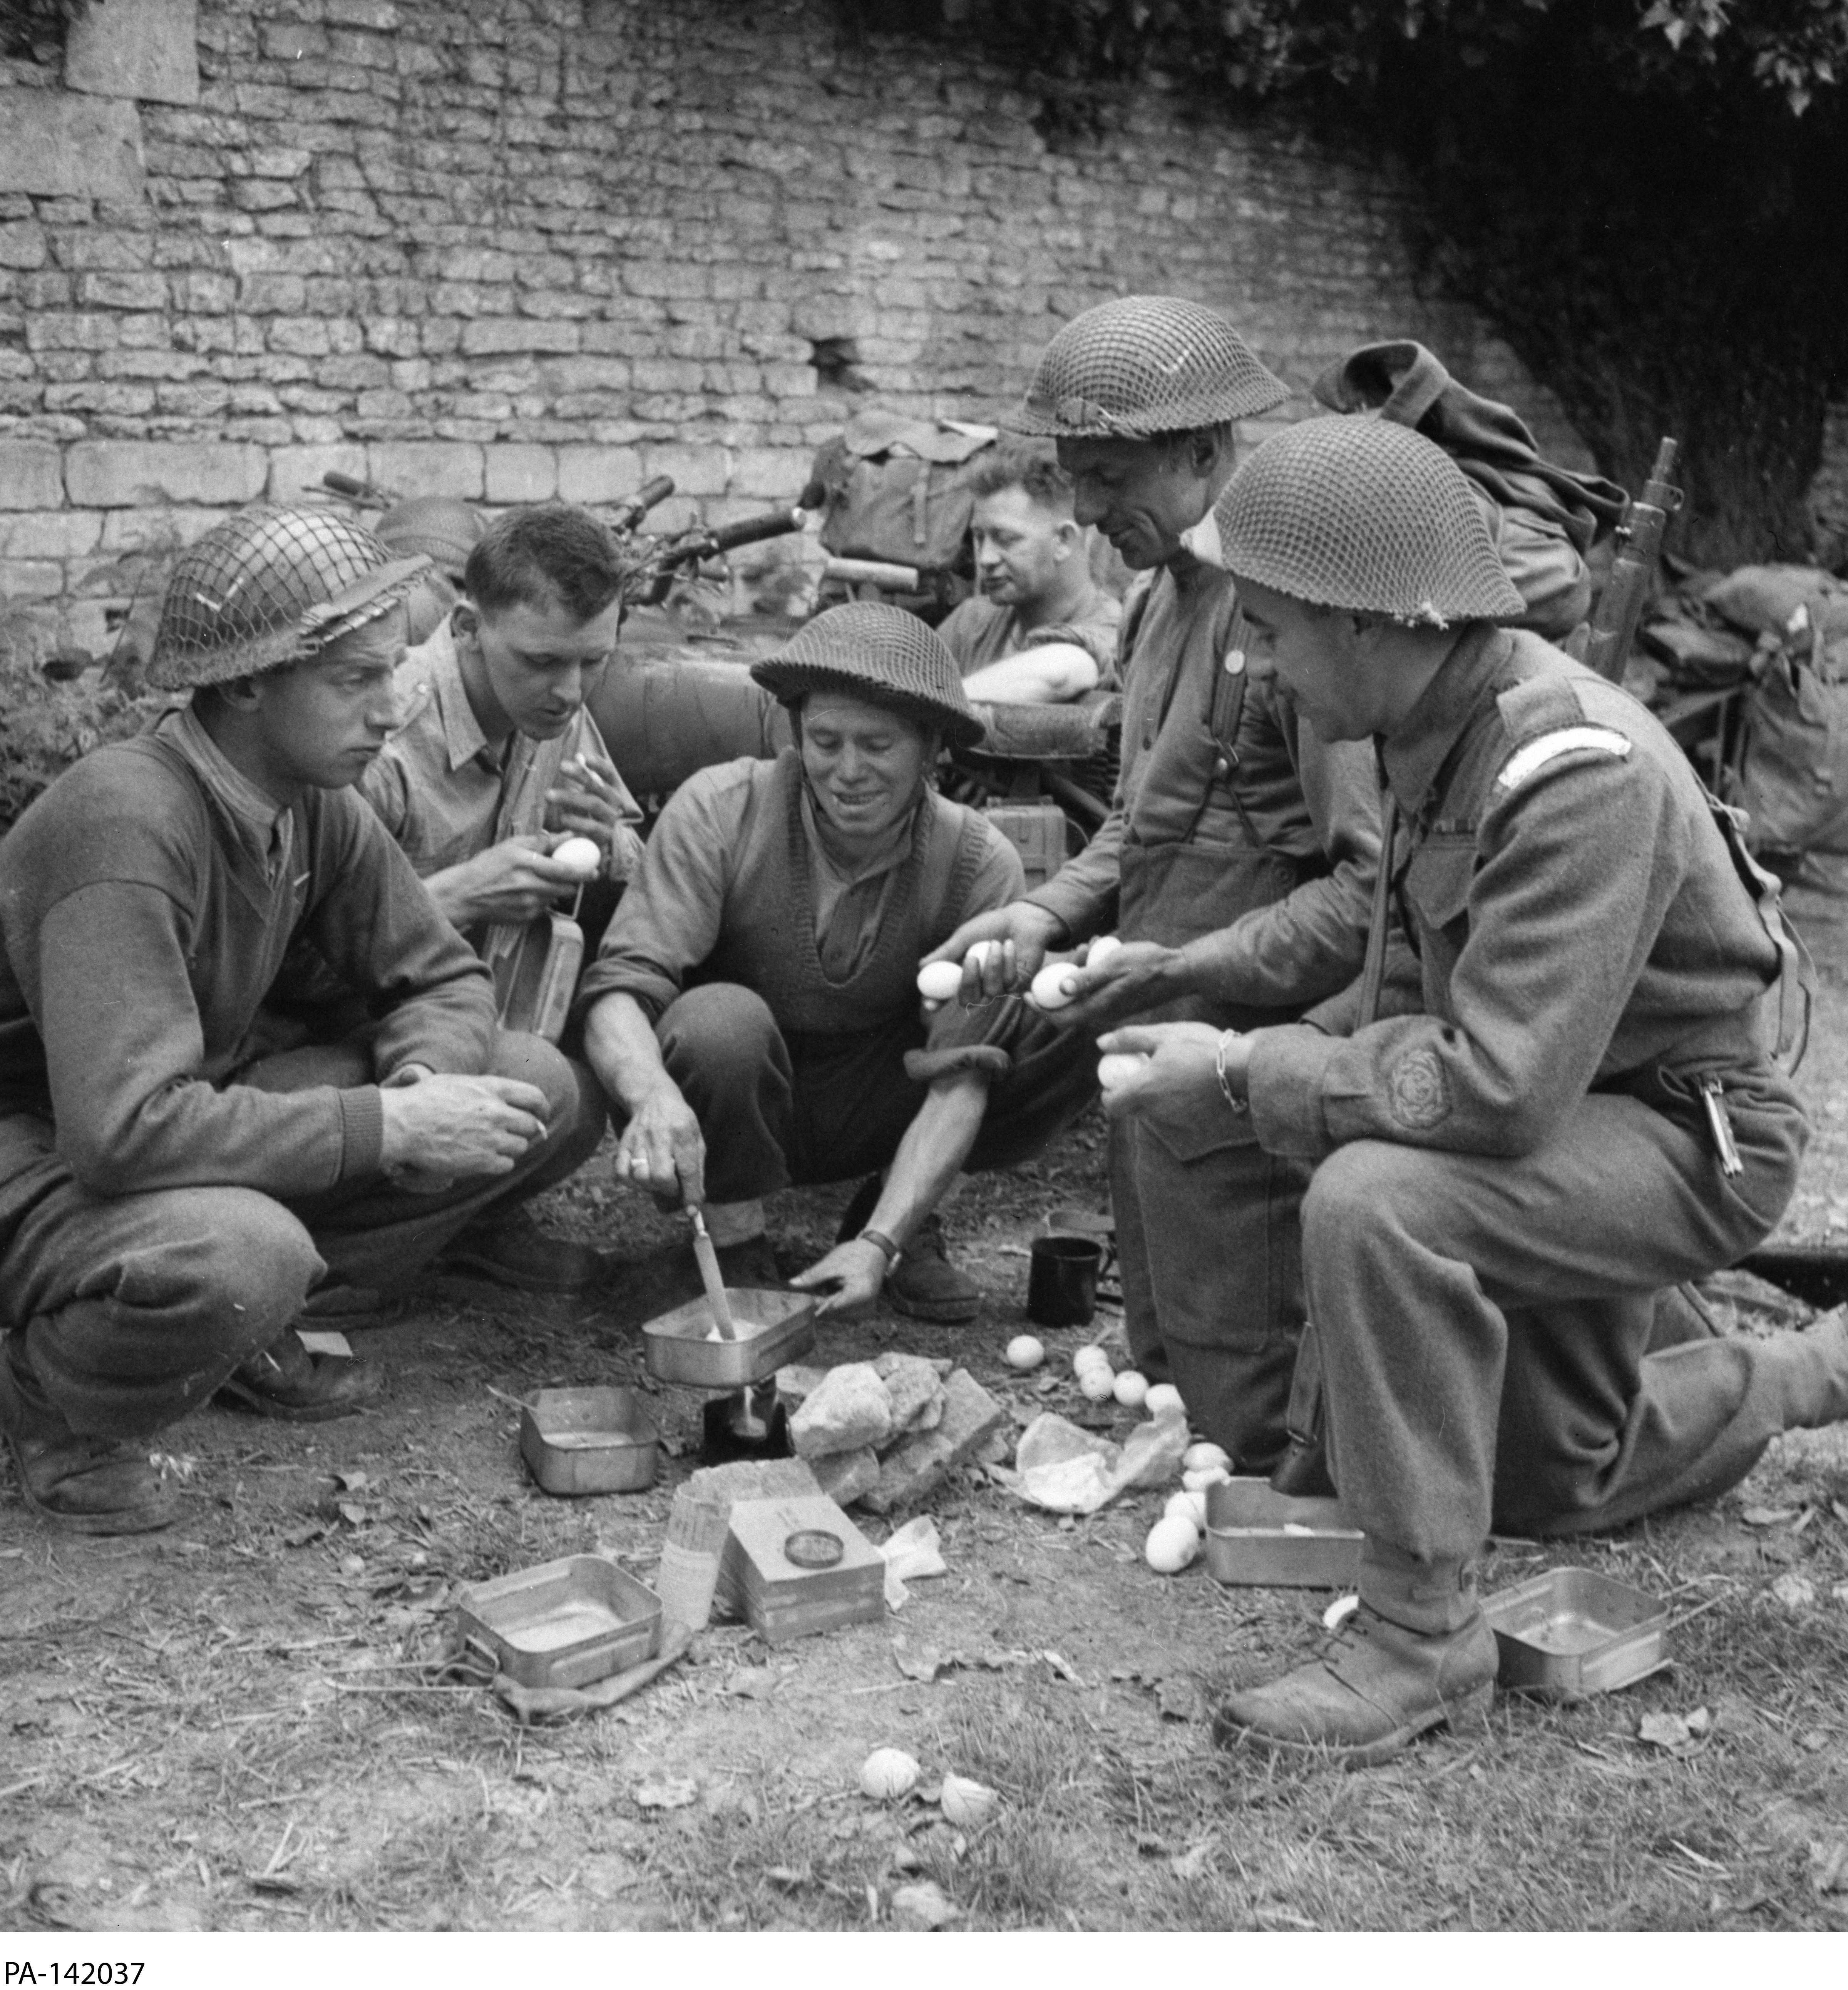 Black and white photograph. Five soldiers crouch around a small flame. One holds a mess tin over the flame, stirring something inside. There are eggs on the ground, waiting to be cooked. Other soldiers mingle behind them.